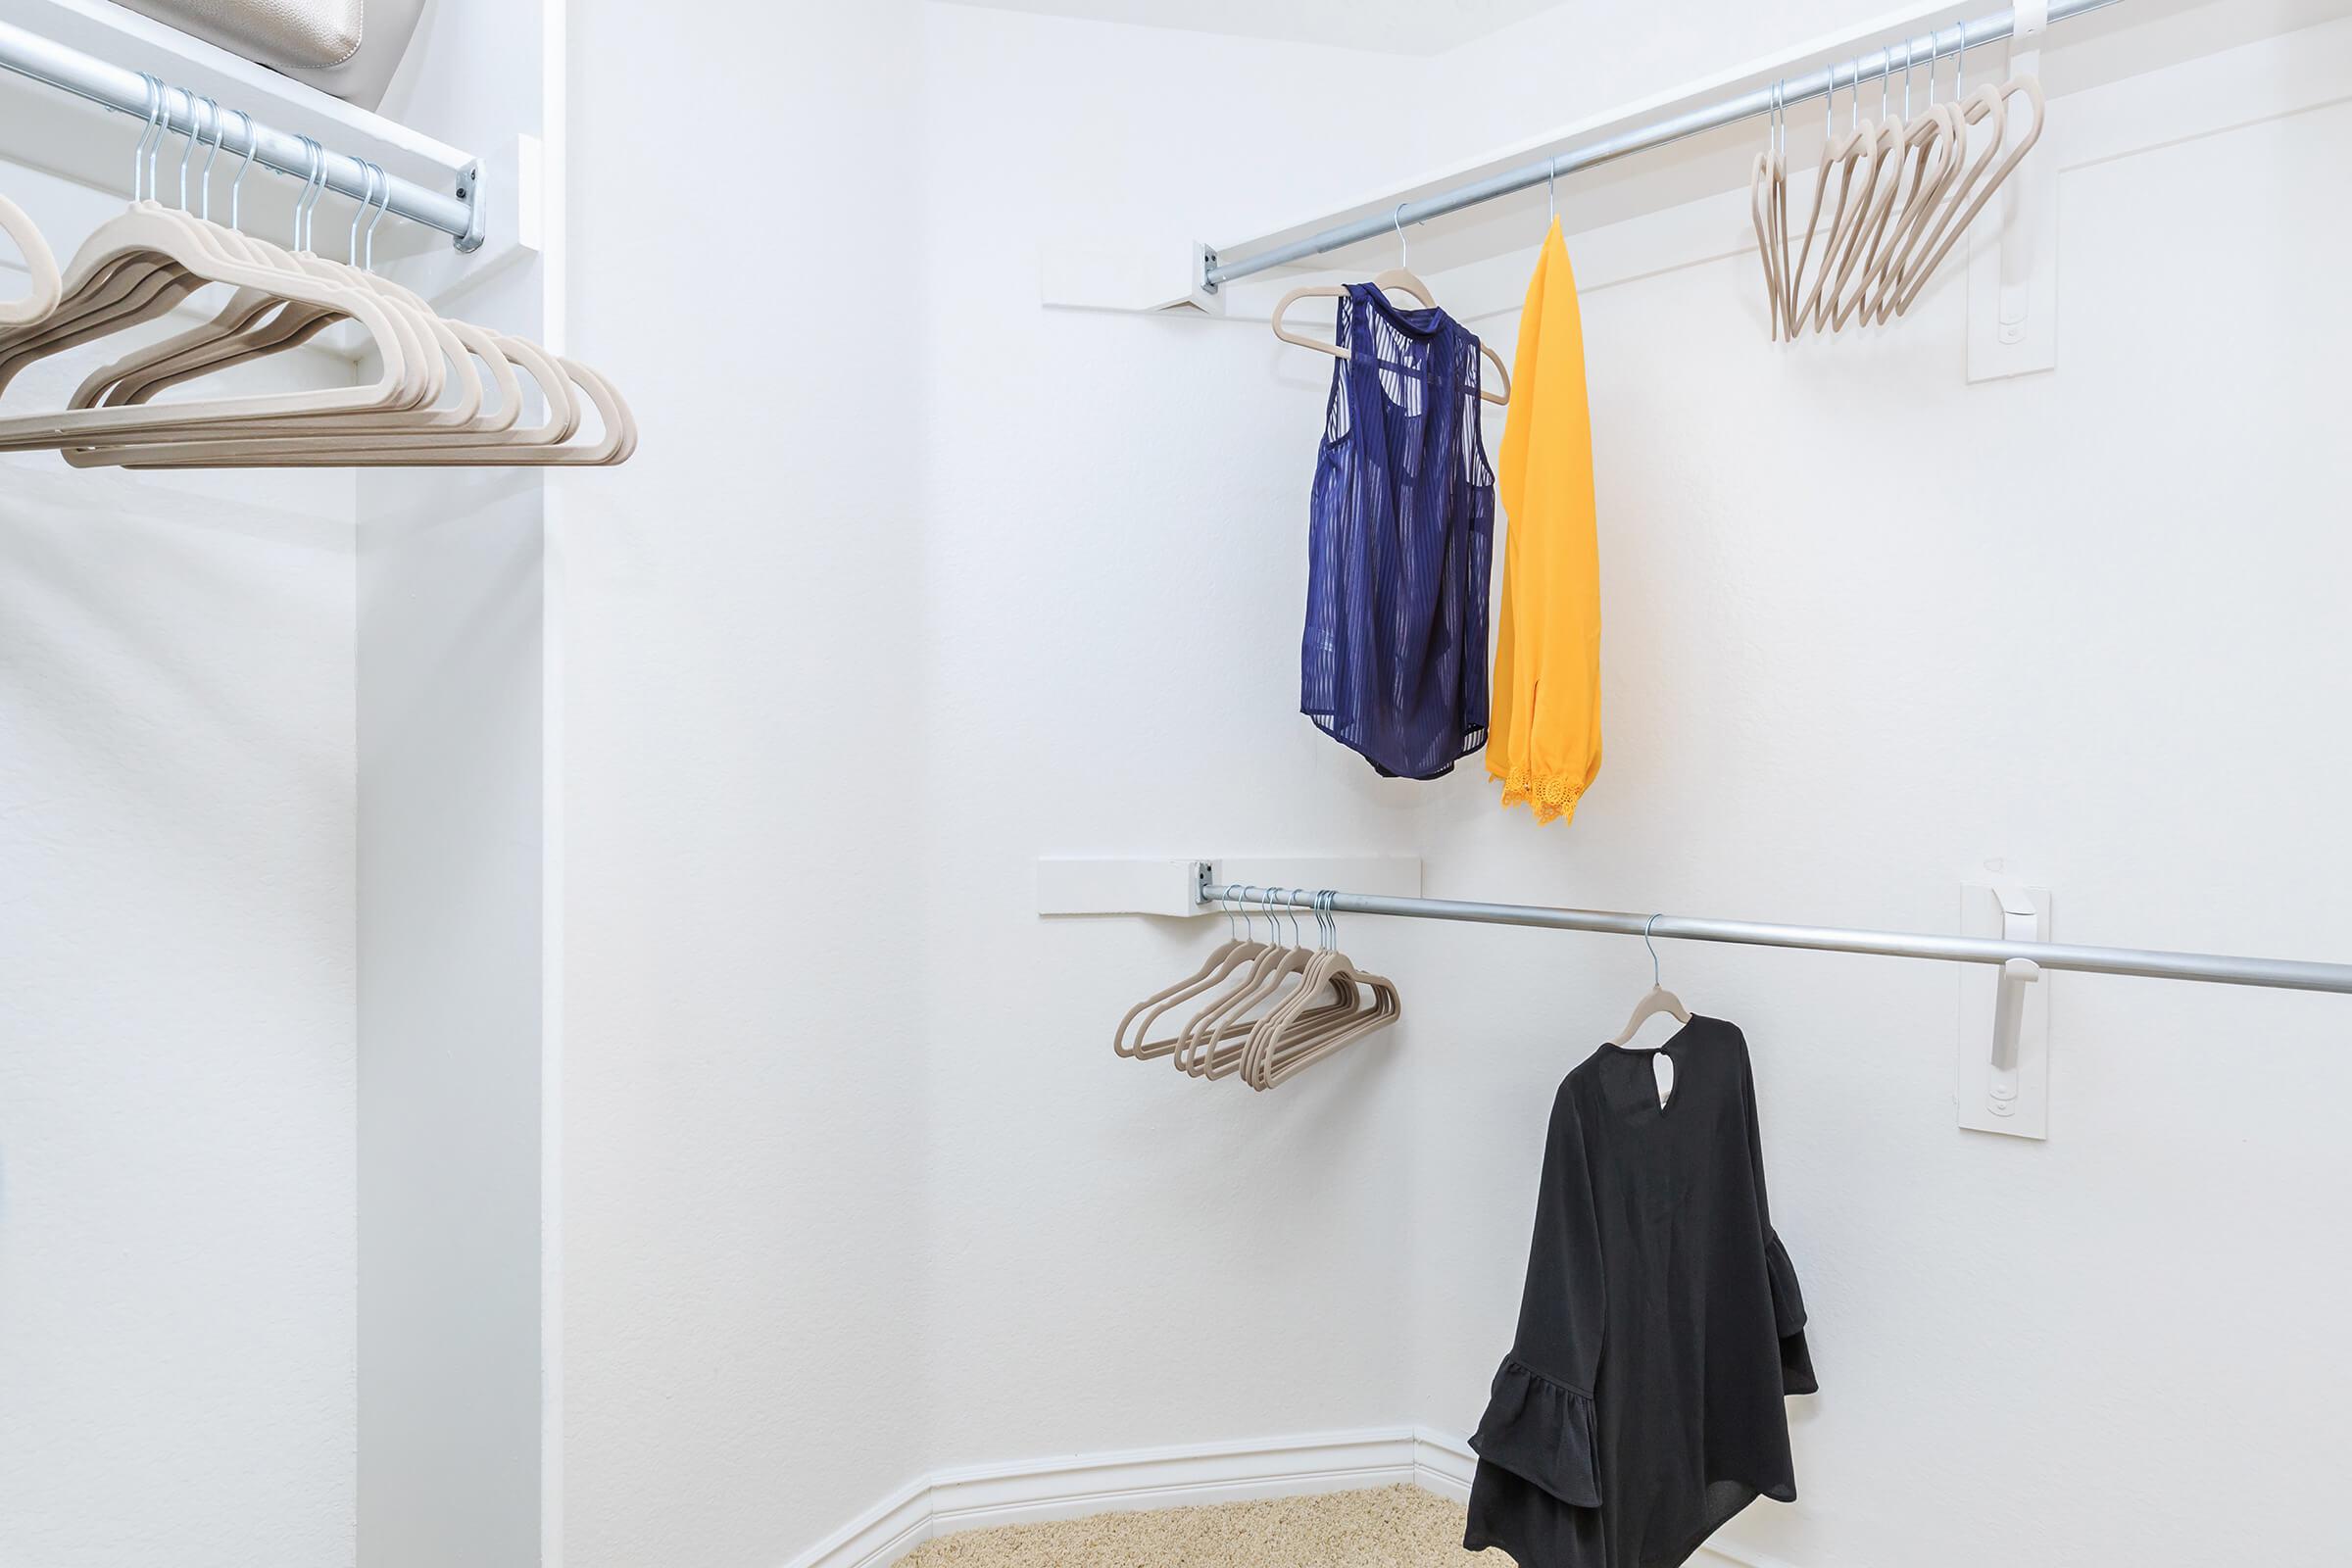 Walk-in closet with hangers and clothes